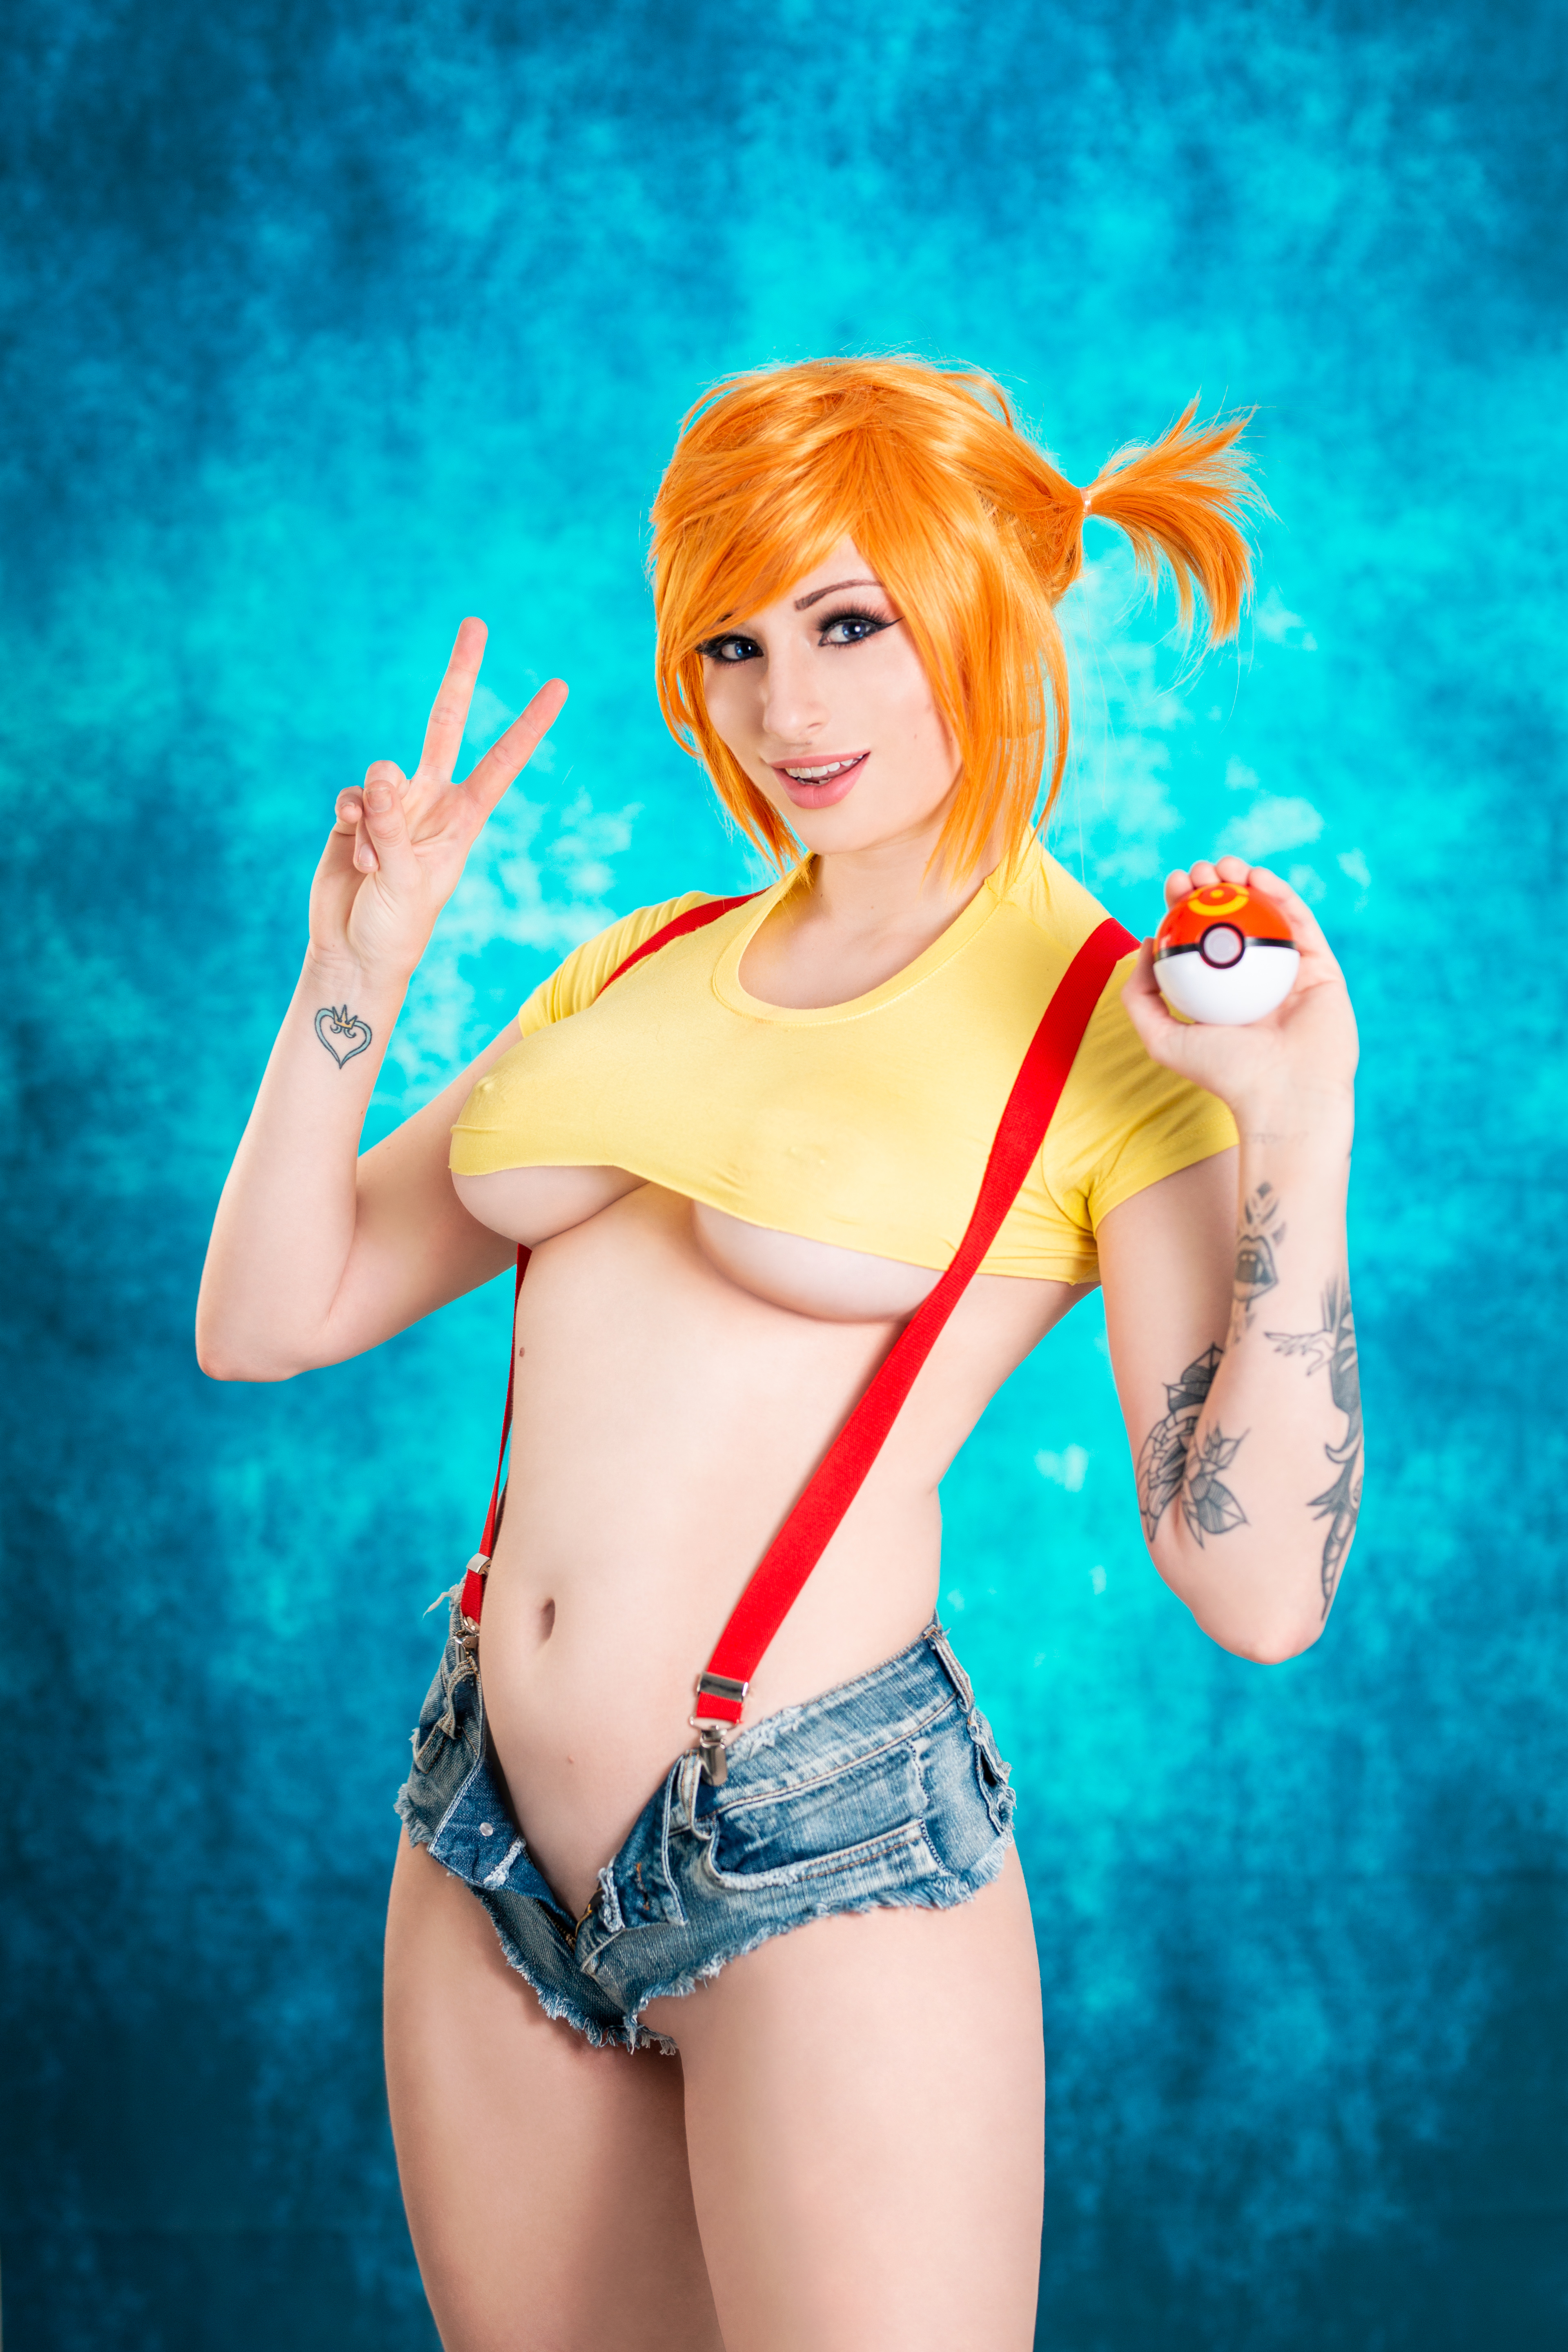 People 3840x5760 Kayla Erin women model redhead looking at viewer smiling peace sign blue eyes short tops yellow tops belly suspenders no bra underboob nipples through clothing jean shorts open shorts shaved pubic hair tattoo Misty (Pokémon) Pokémon Poke Ball blue background indoors women indoors pierced nipples cyan high waisted shorts cosplay inked girls boobs